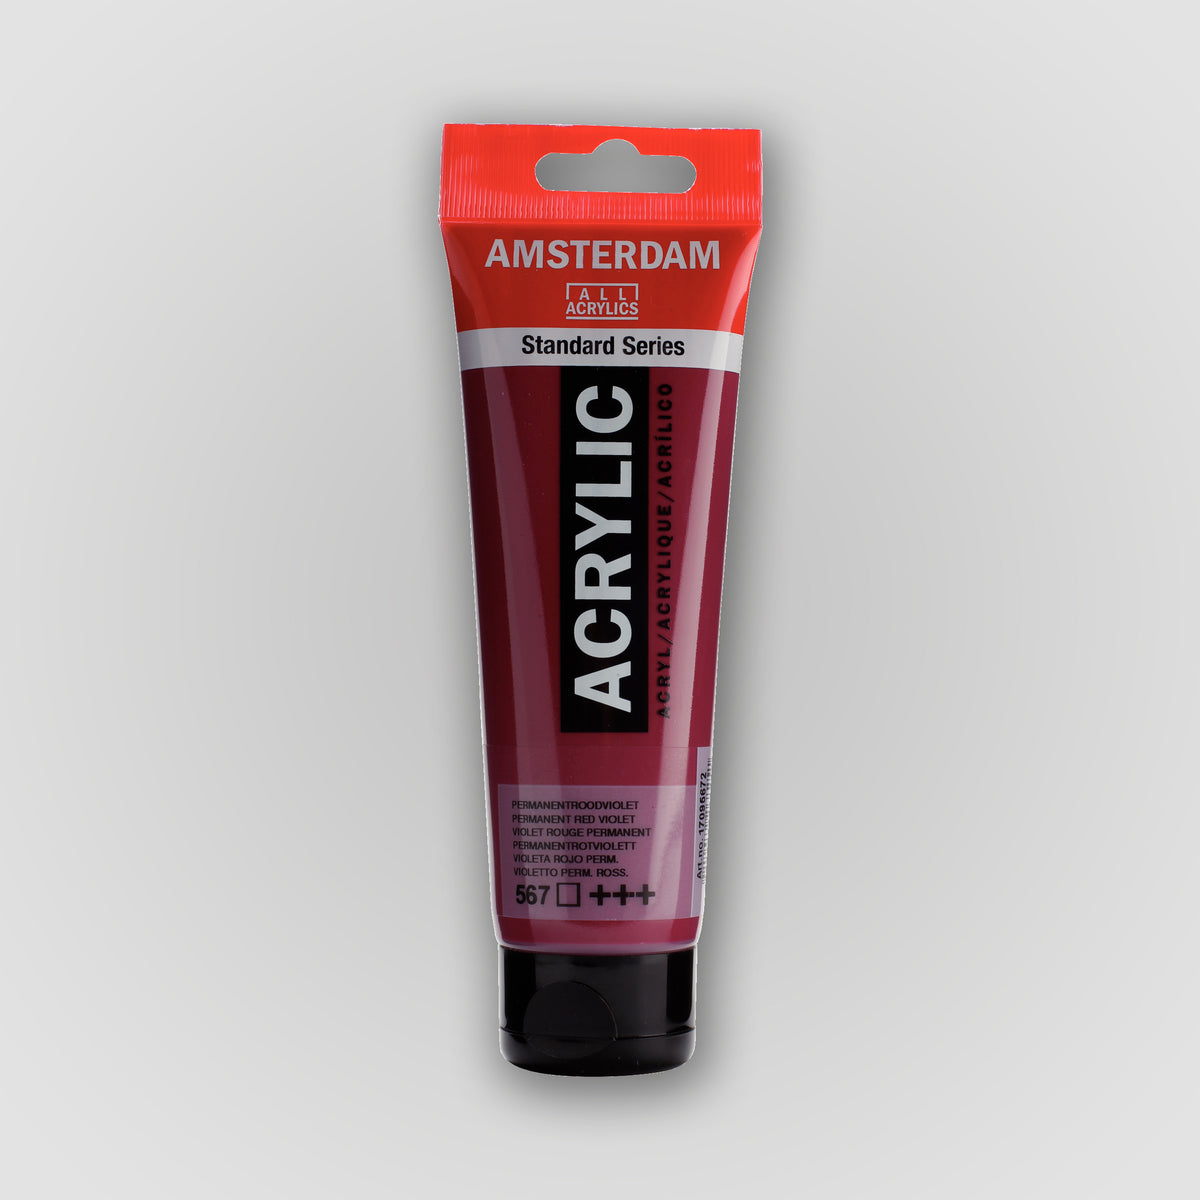 Amsterdam Acrylic paint 120 ml 567 Permanent red violet